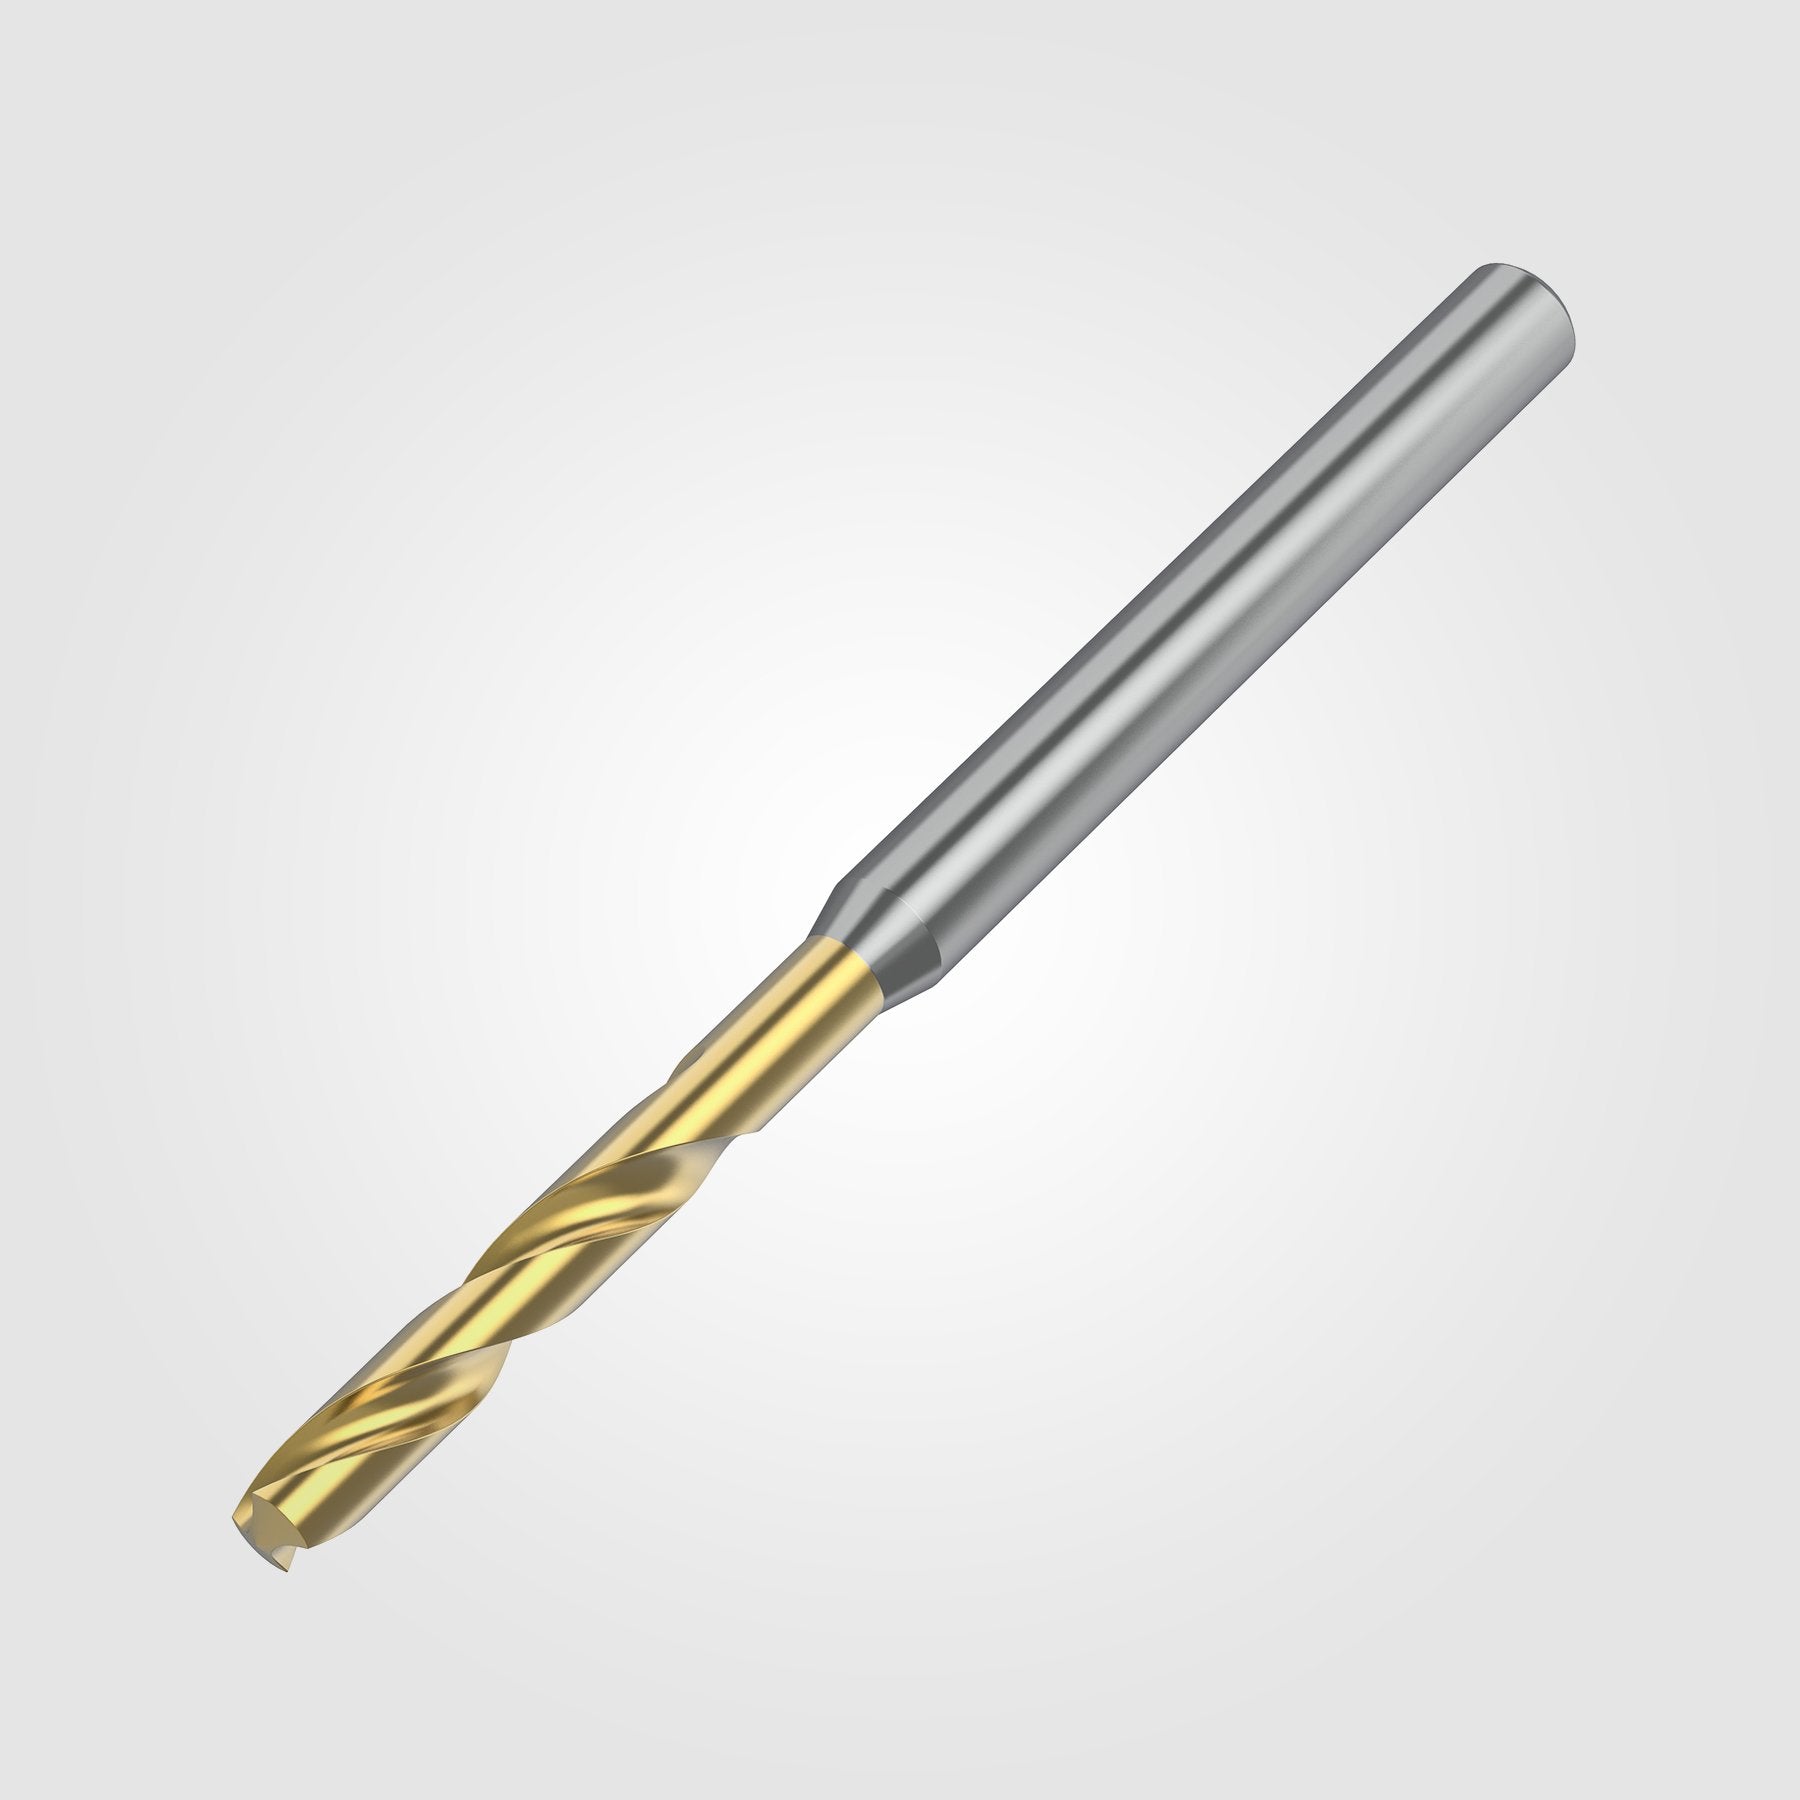 GOdrill (THROUGH COOLANT) | 2.383mm / .0938" / 3xD | SOLID CARBIDE DRILL | 4148843